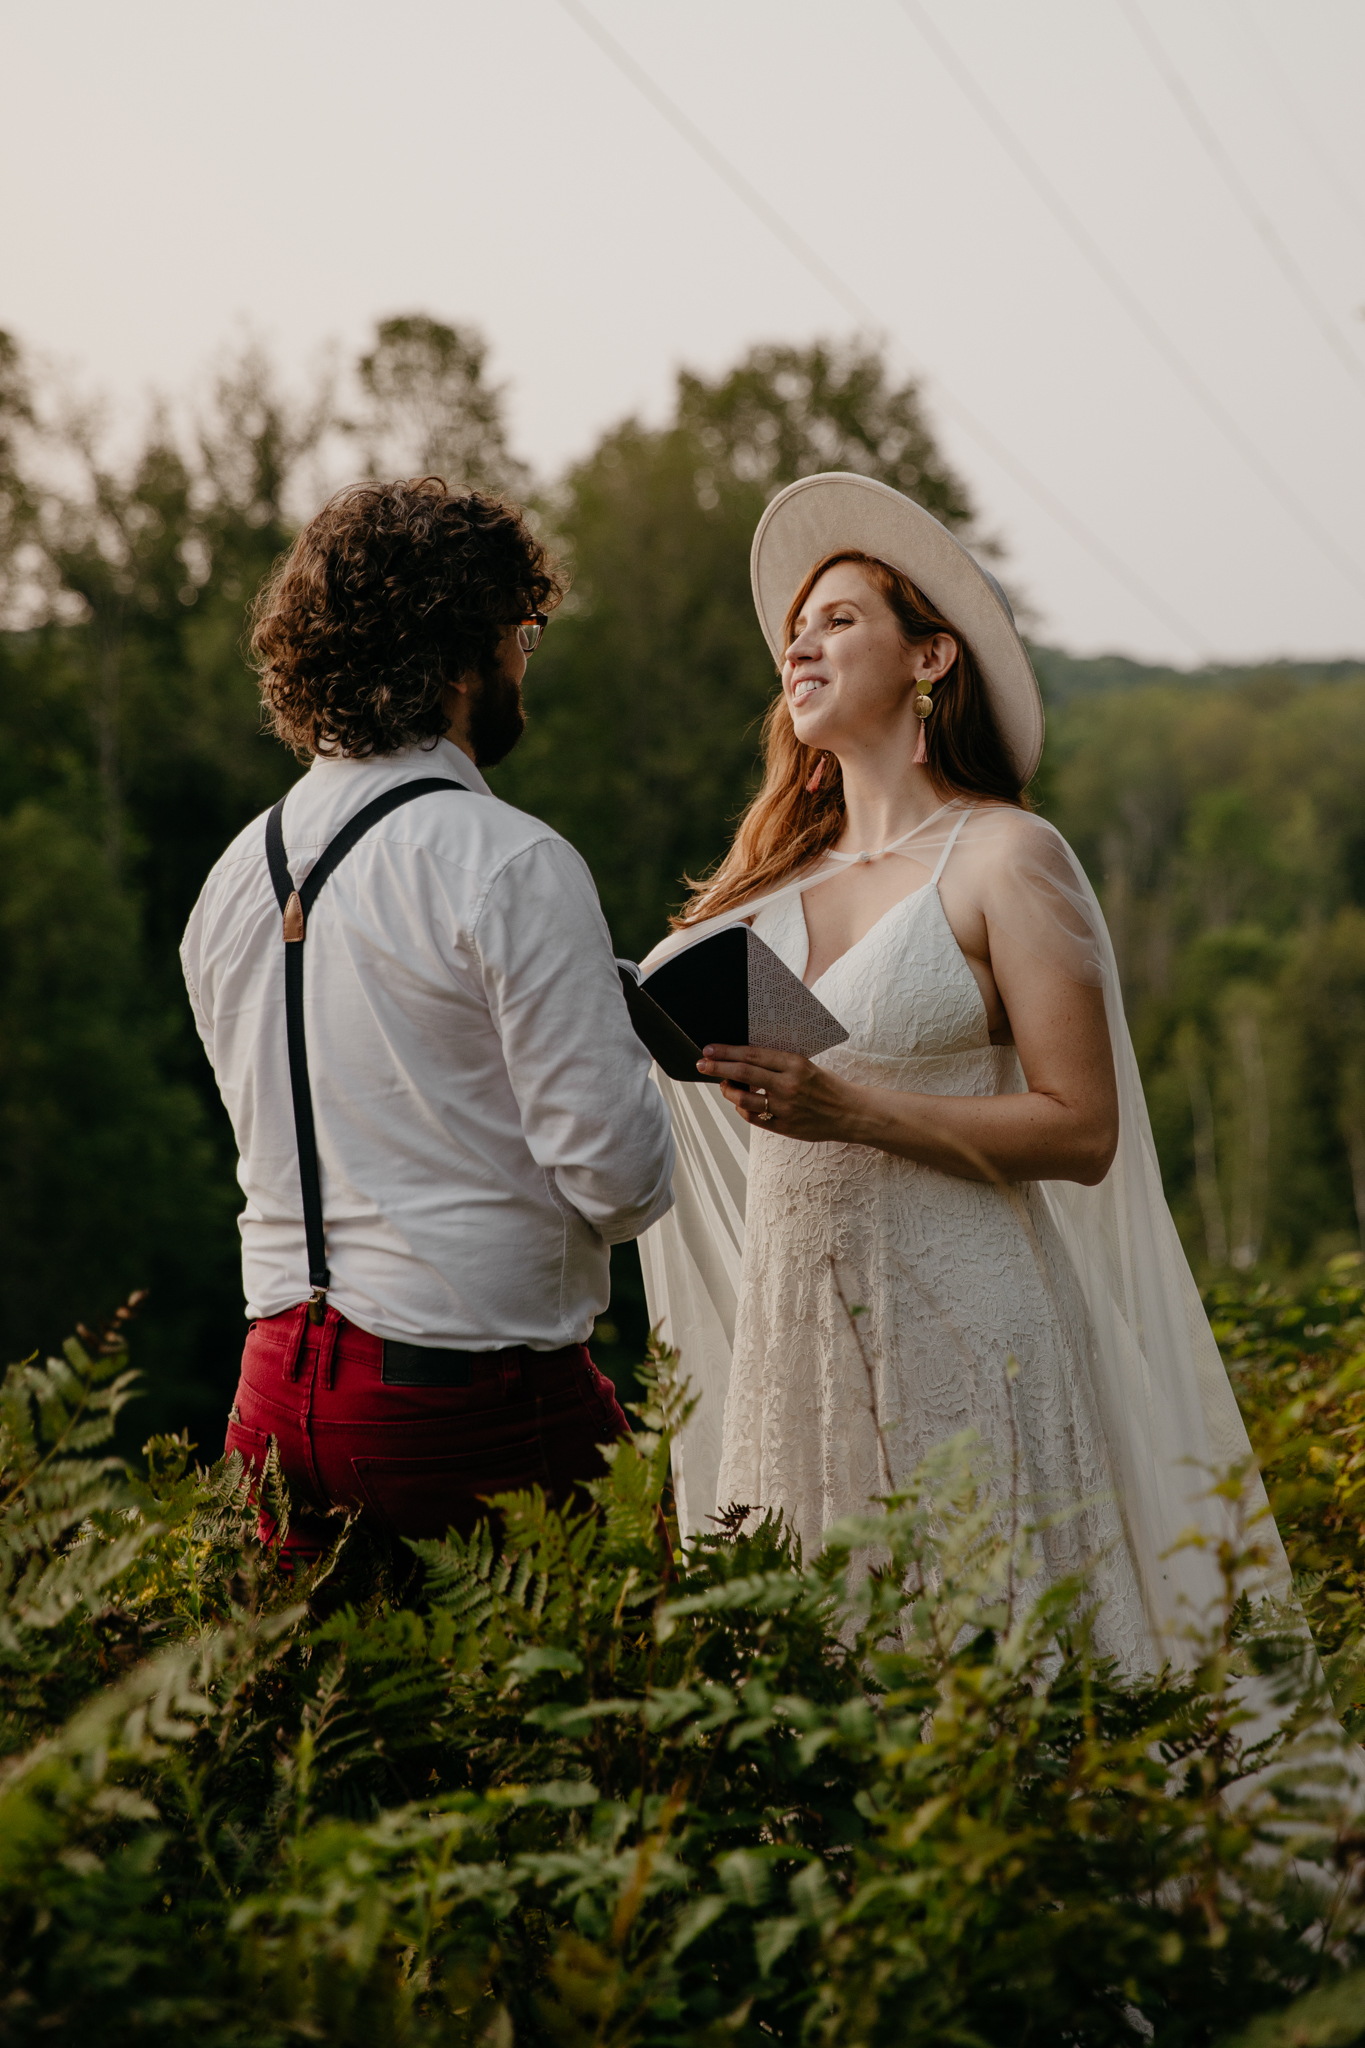 The sweetest ceremony on summer evening // Michigan Forest Elopement